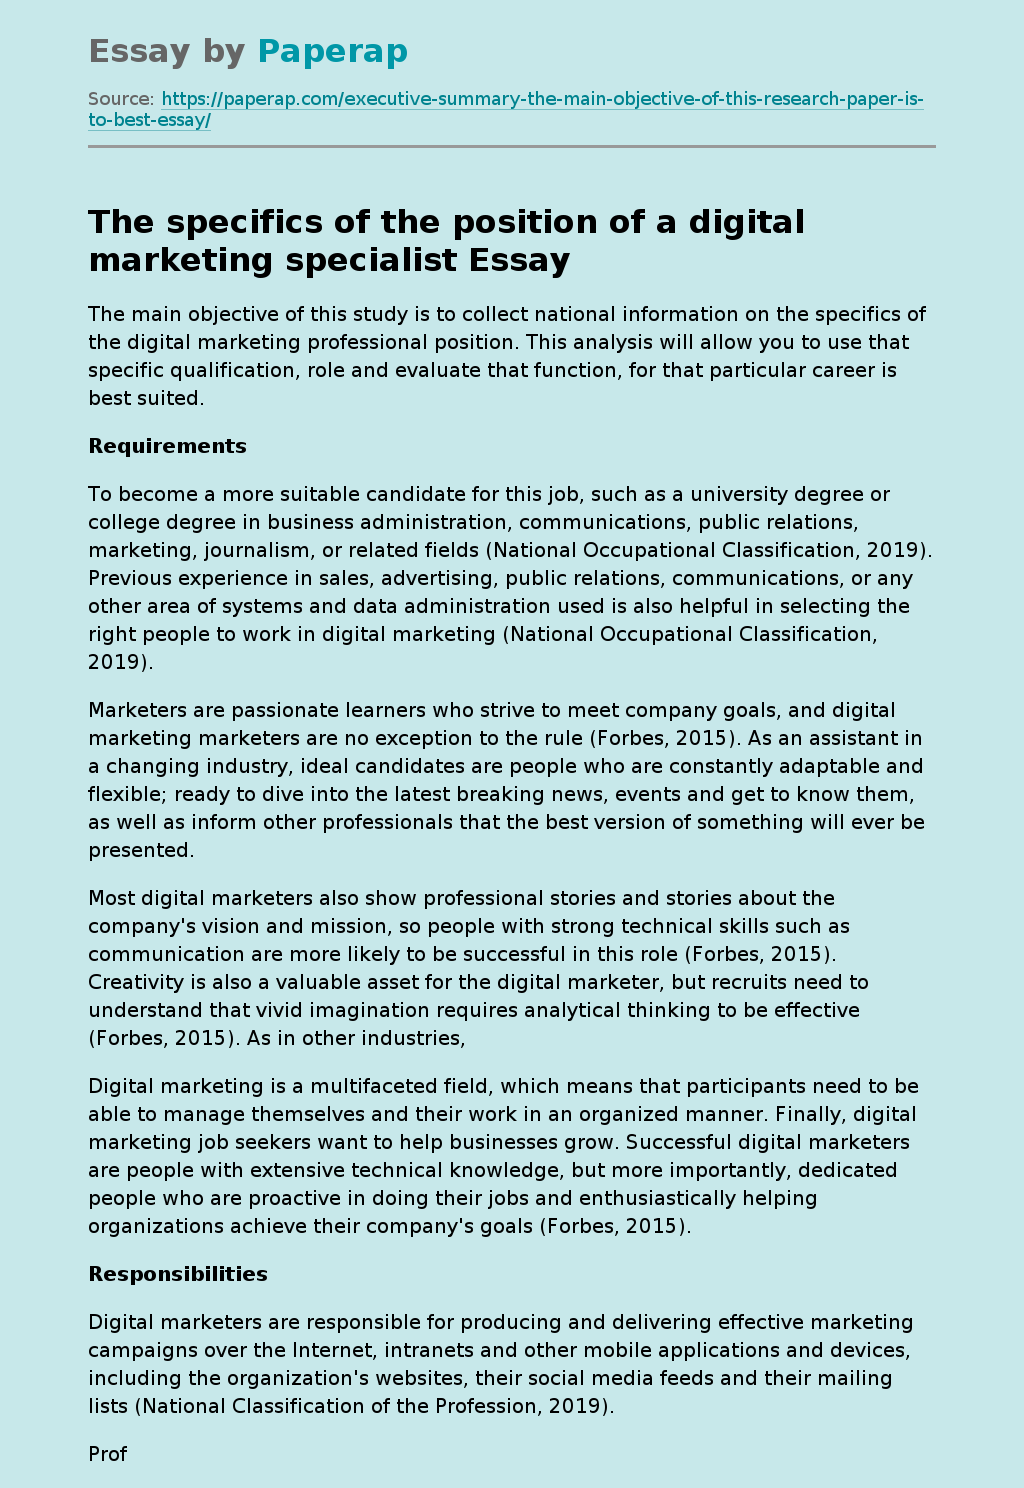 The specifics of the position of a digital marketing specialist